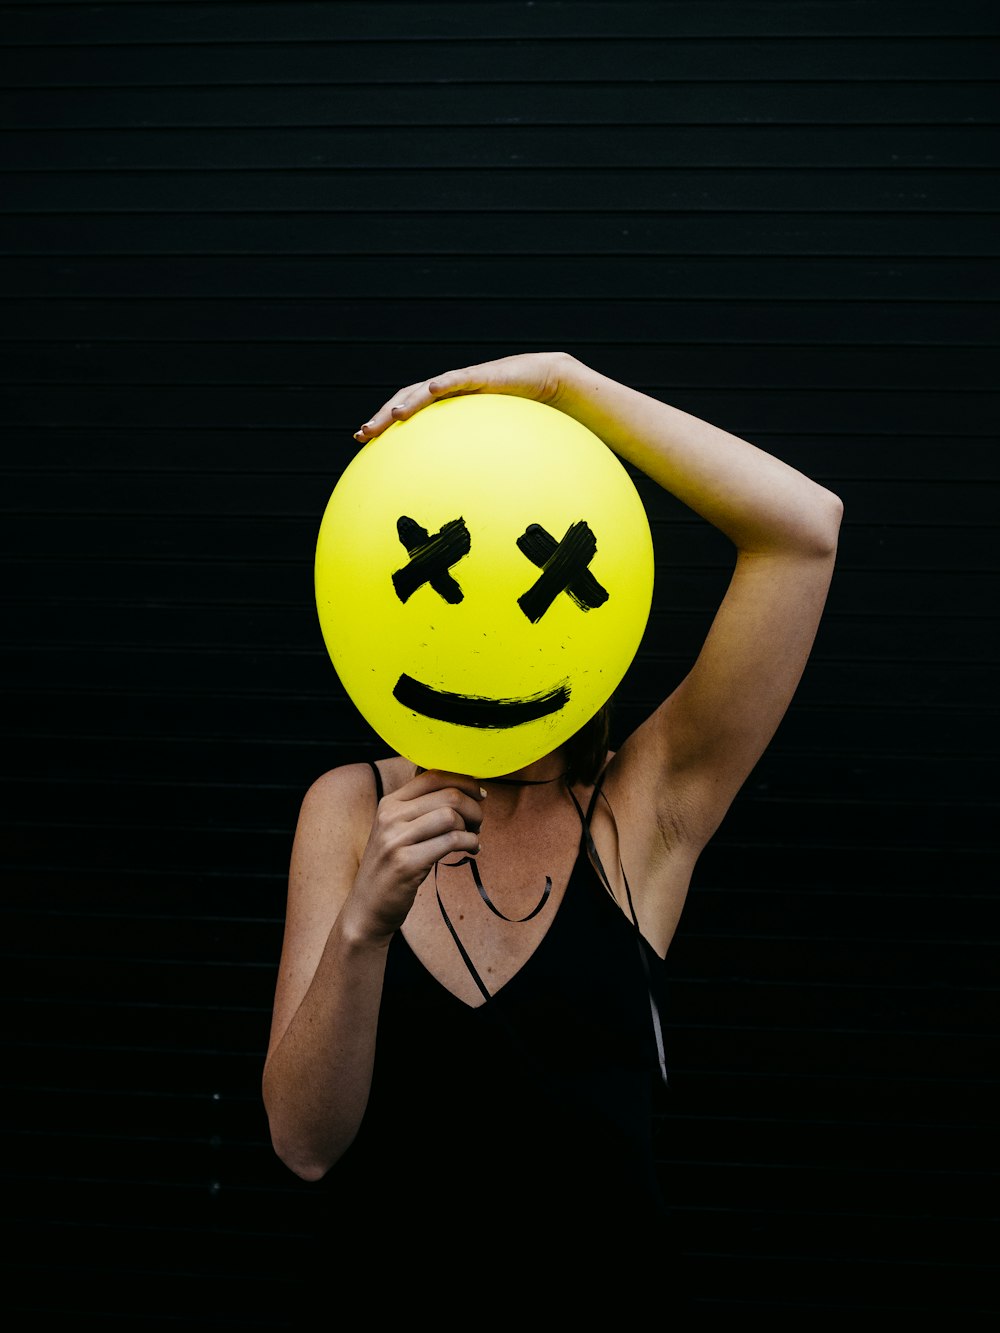 500+ Smiley Face Pictures  Download Free Images on Unsplash